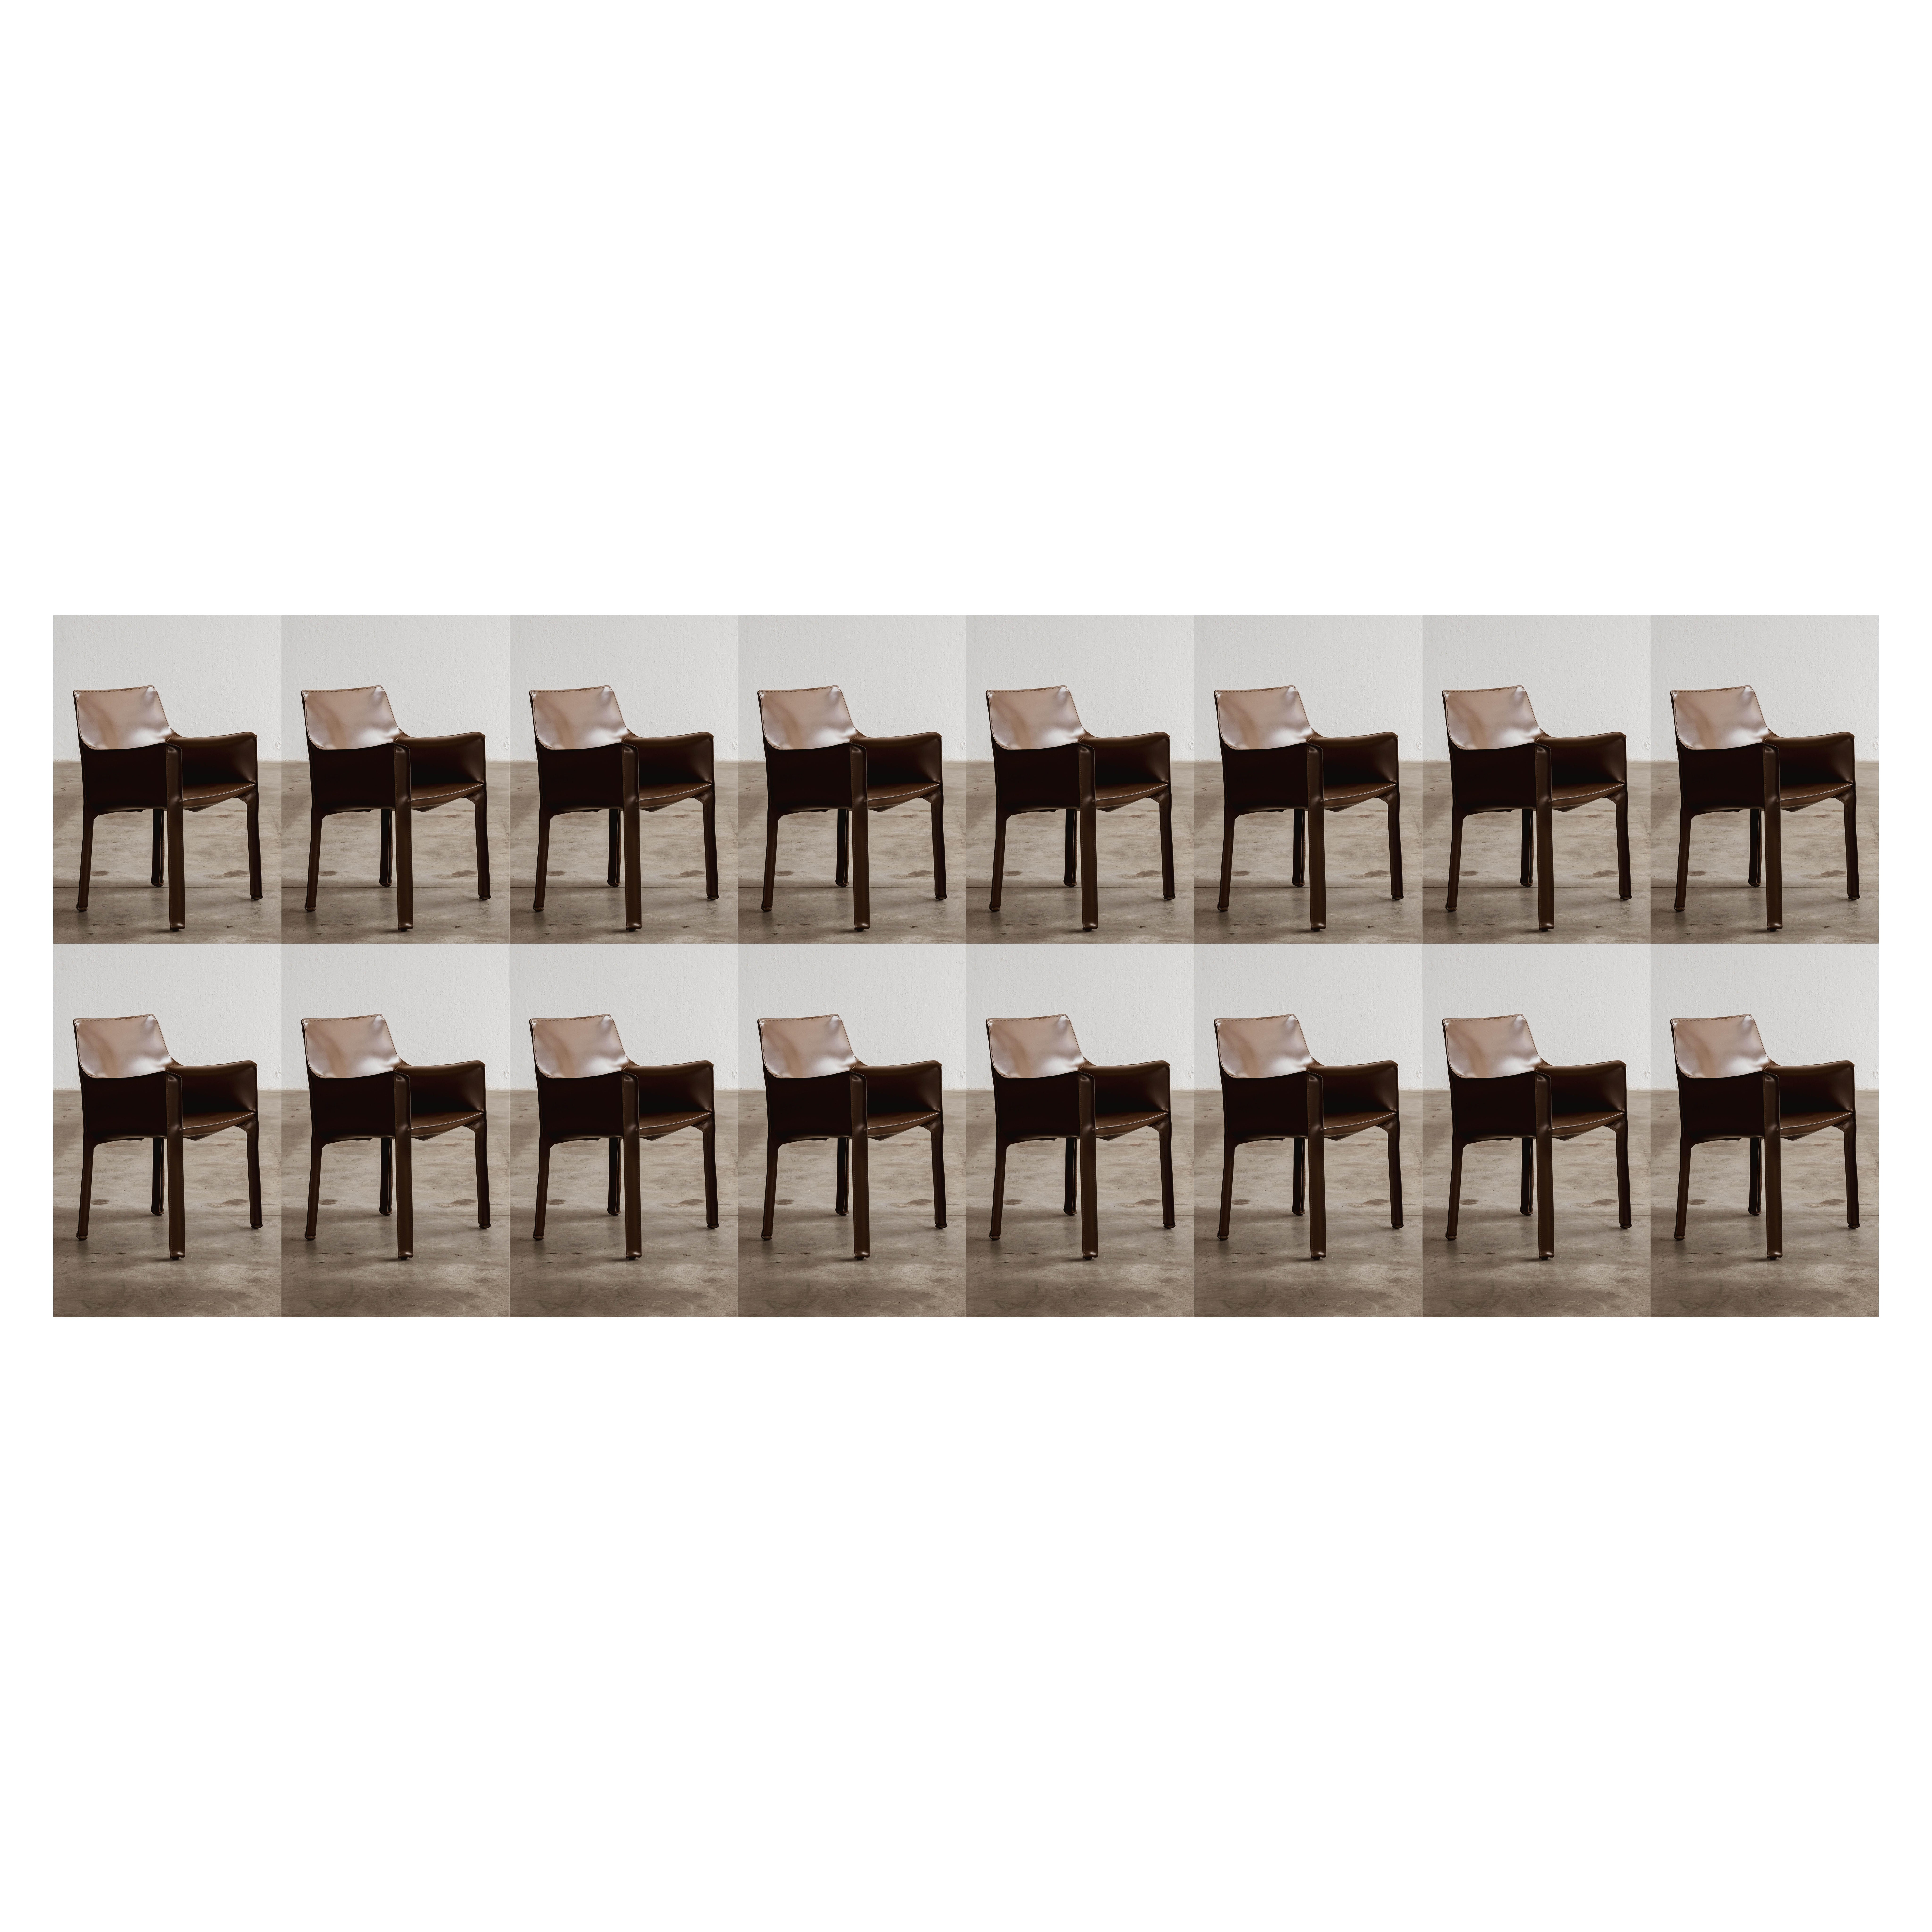 Mario Bellini "CAB 413" Chairs for Cassina in Dark Brown, 1977, Set of 16 For Sale